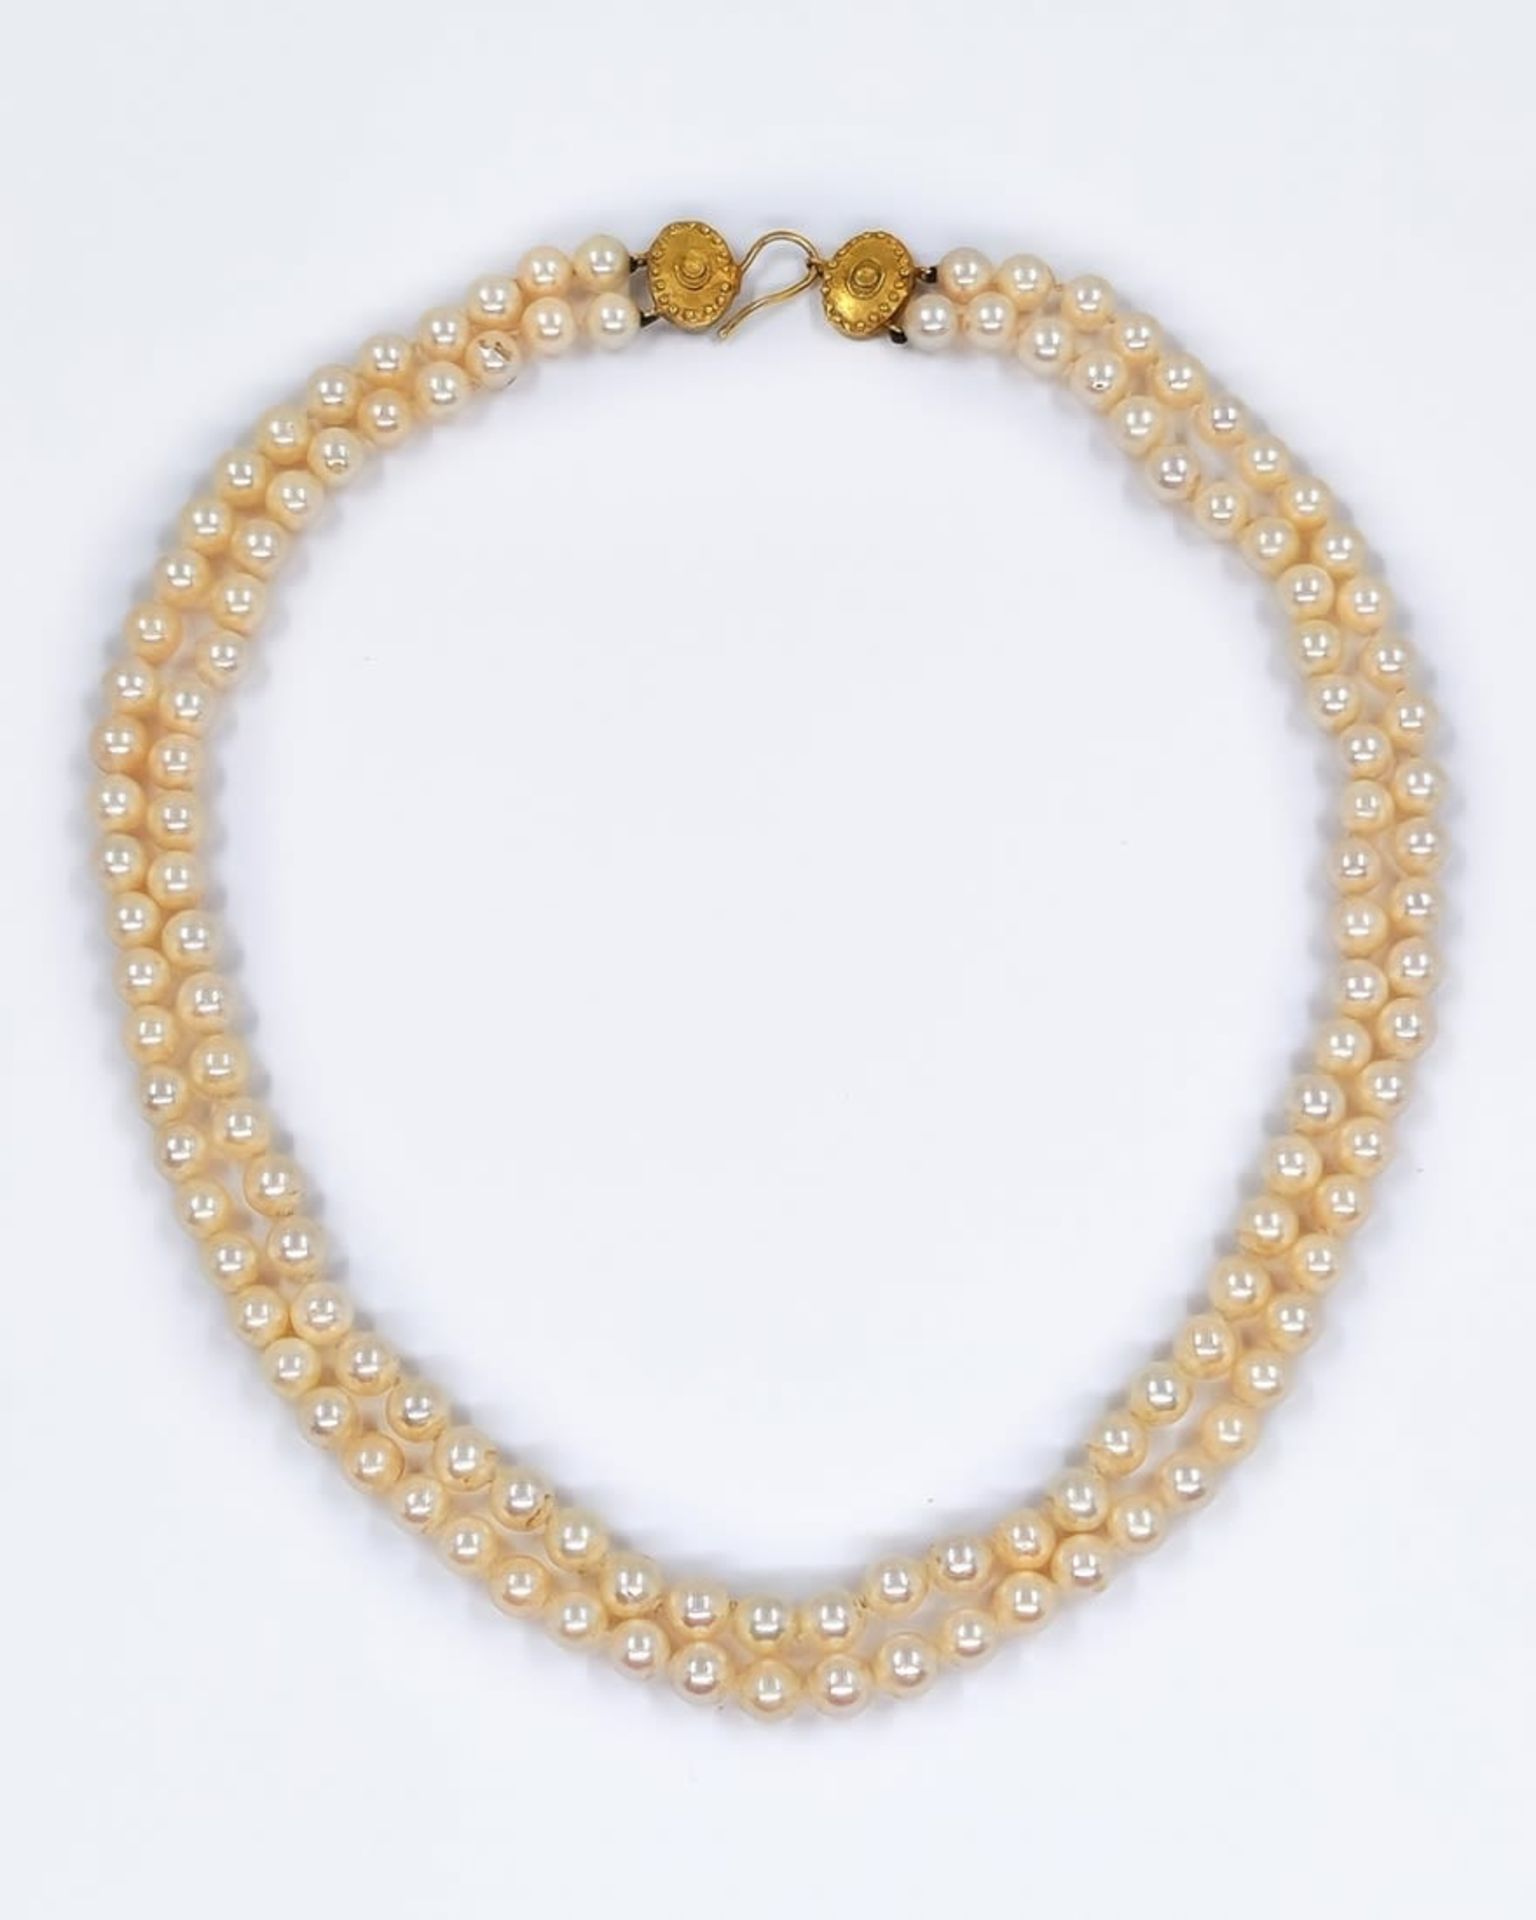 High quality Italian pearl neckless, made of two rows of sea pearls and a bracket made of 18 karat